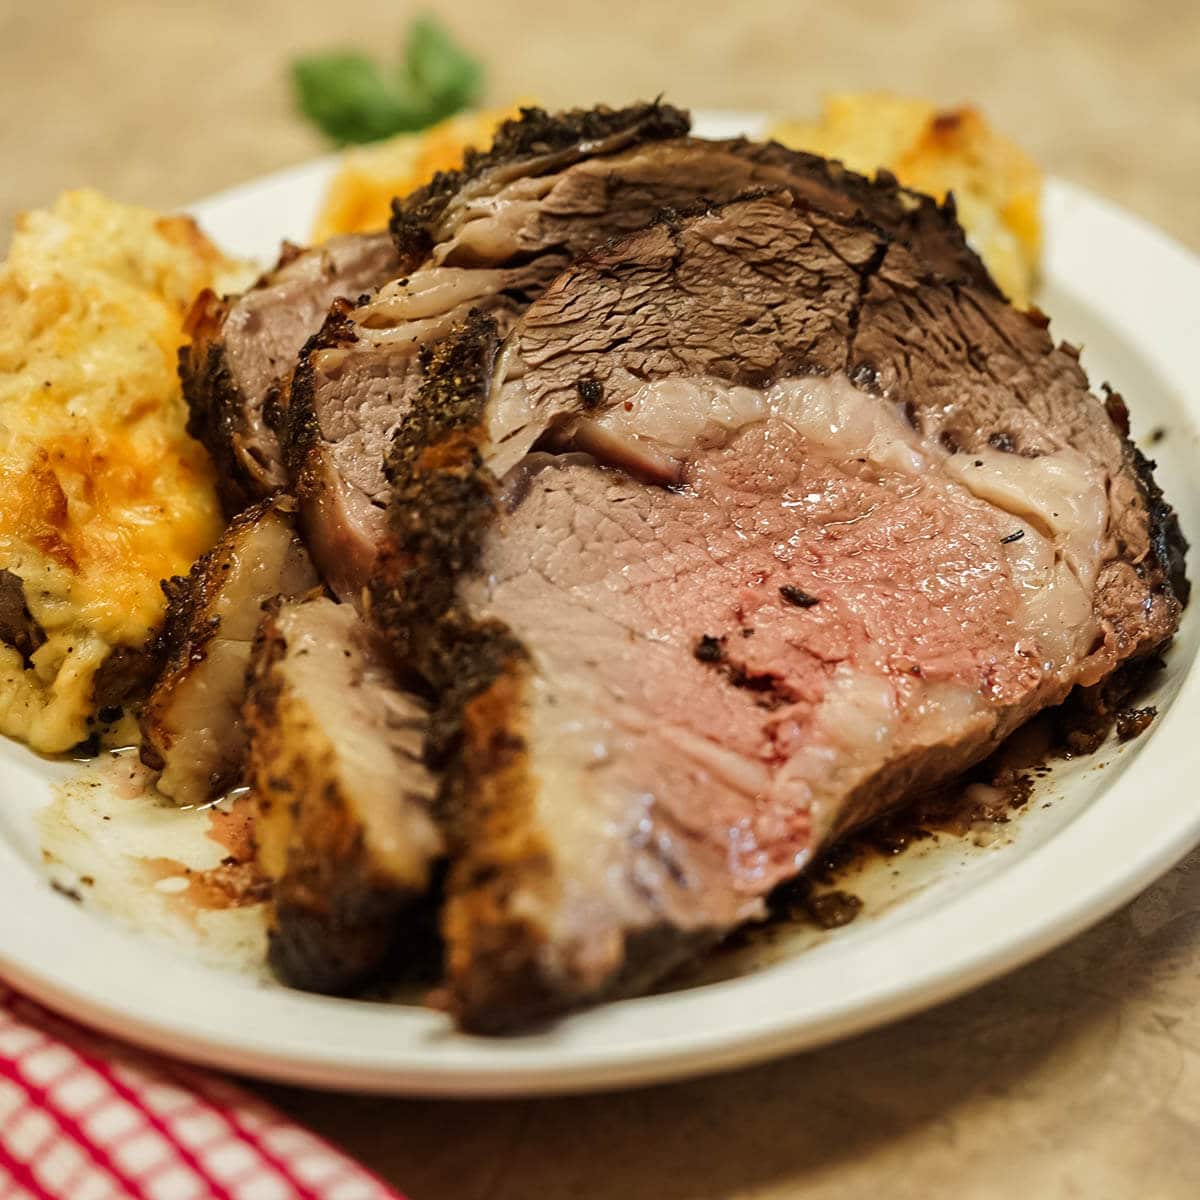 Sliced Prime Rib on platter with baked potatoes. 